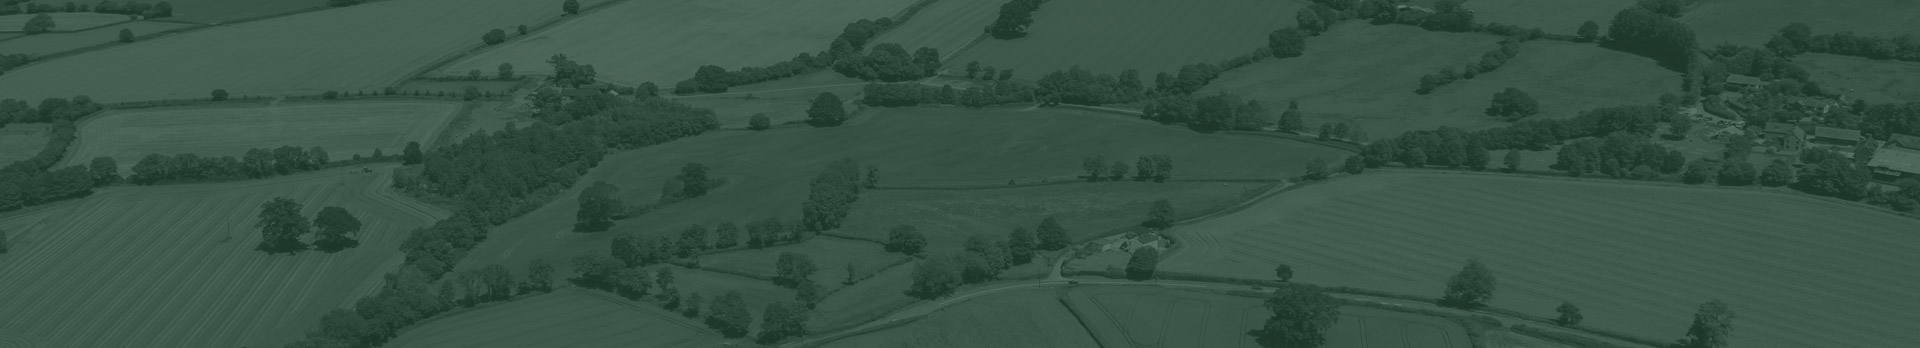 Update from Defra on the environmental land management schemes